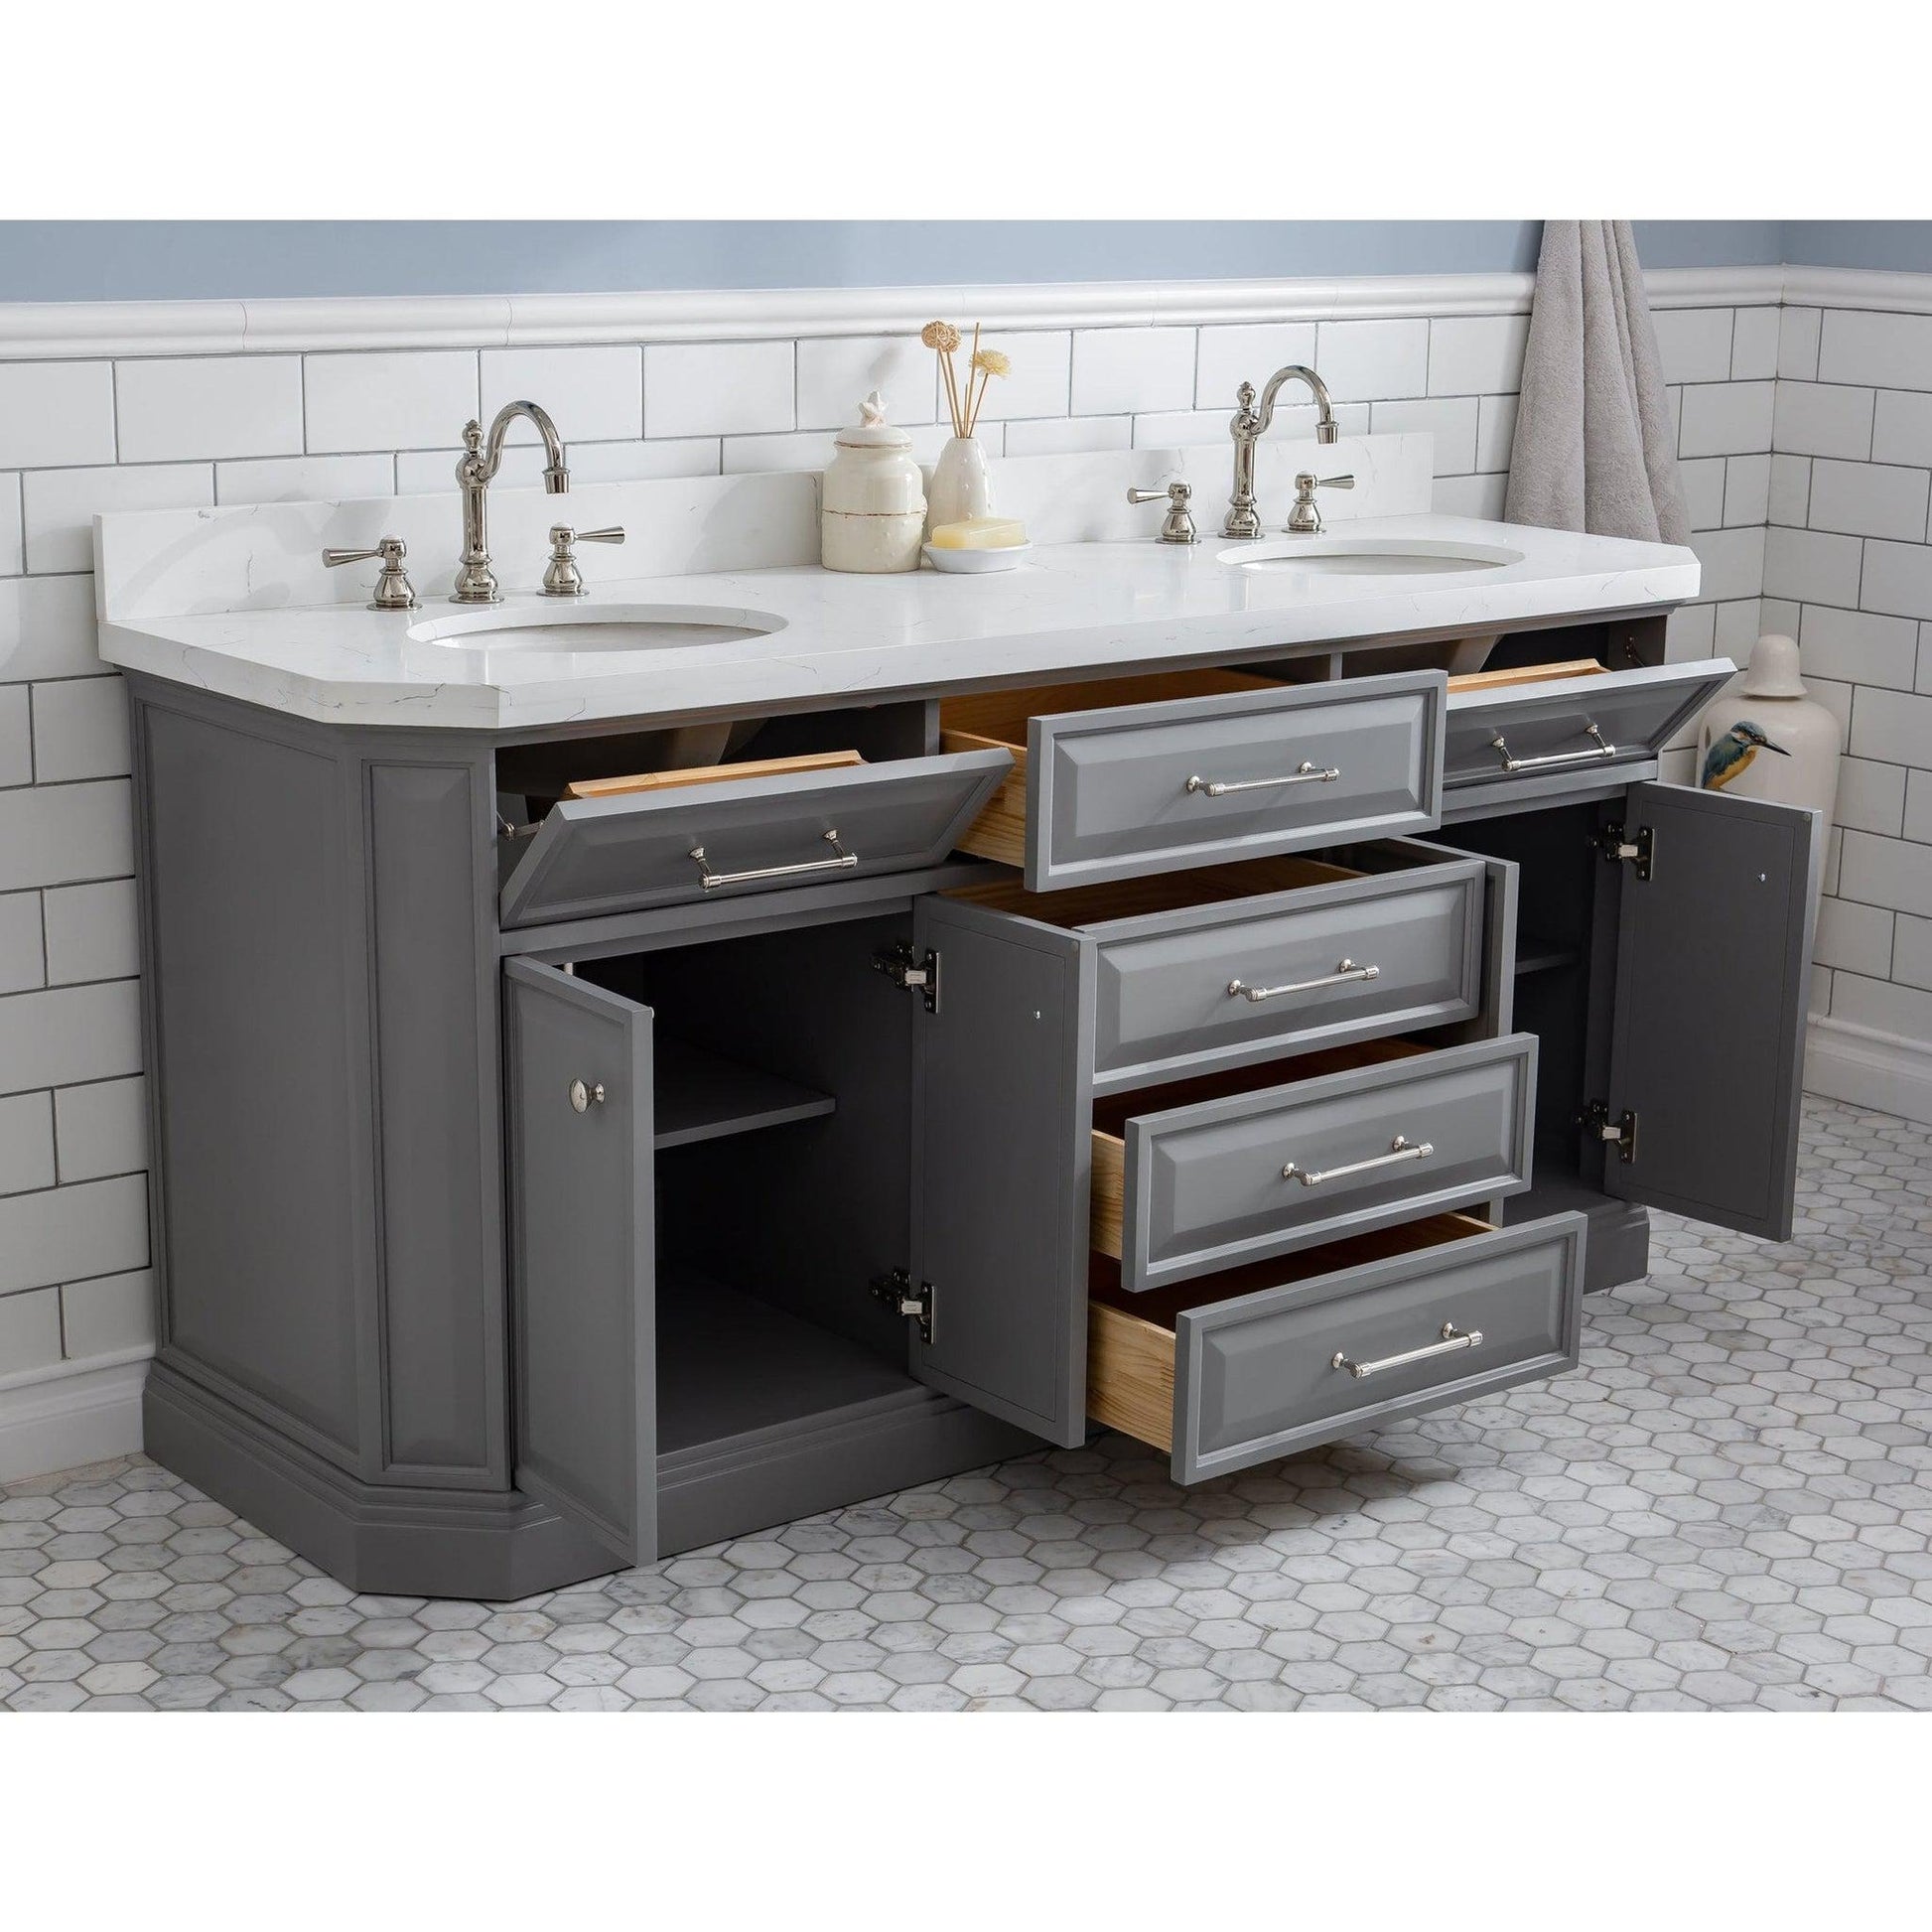 Water Creation Palace 72" Quartz Carrara Cashmere Grey Bathroom Vanity Set With Hardware And F2-0012 Faucets in Polished Nickel (PVD) Finish